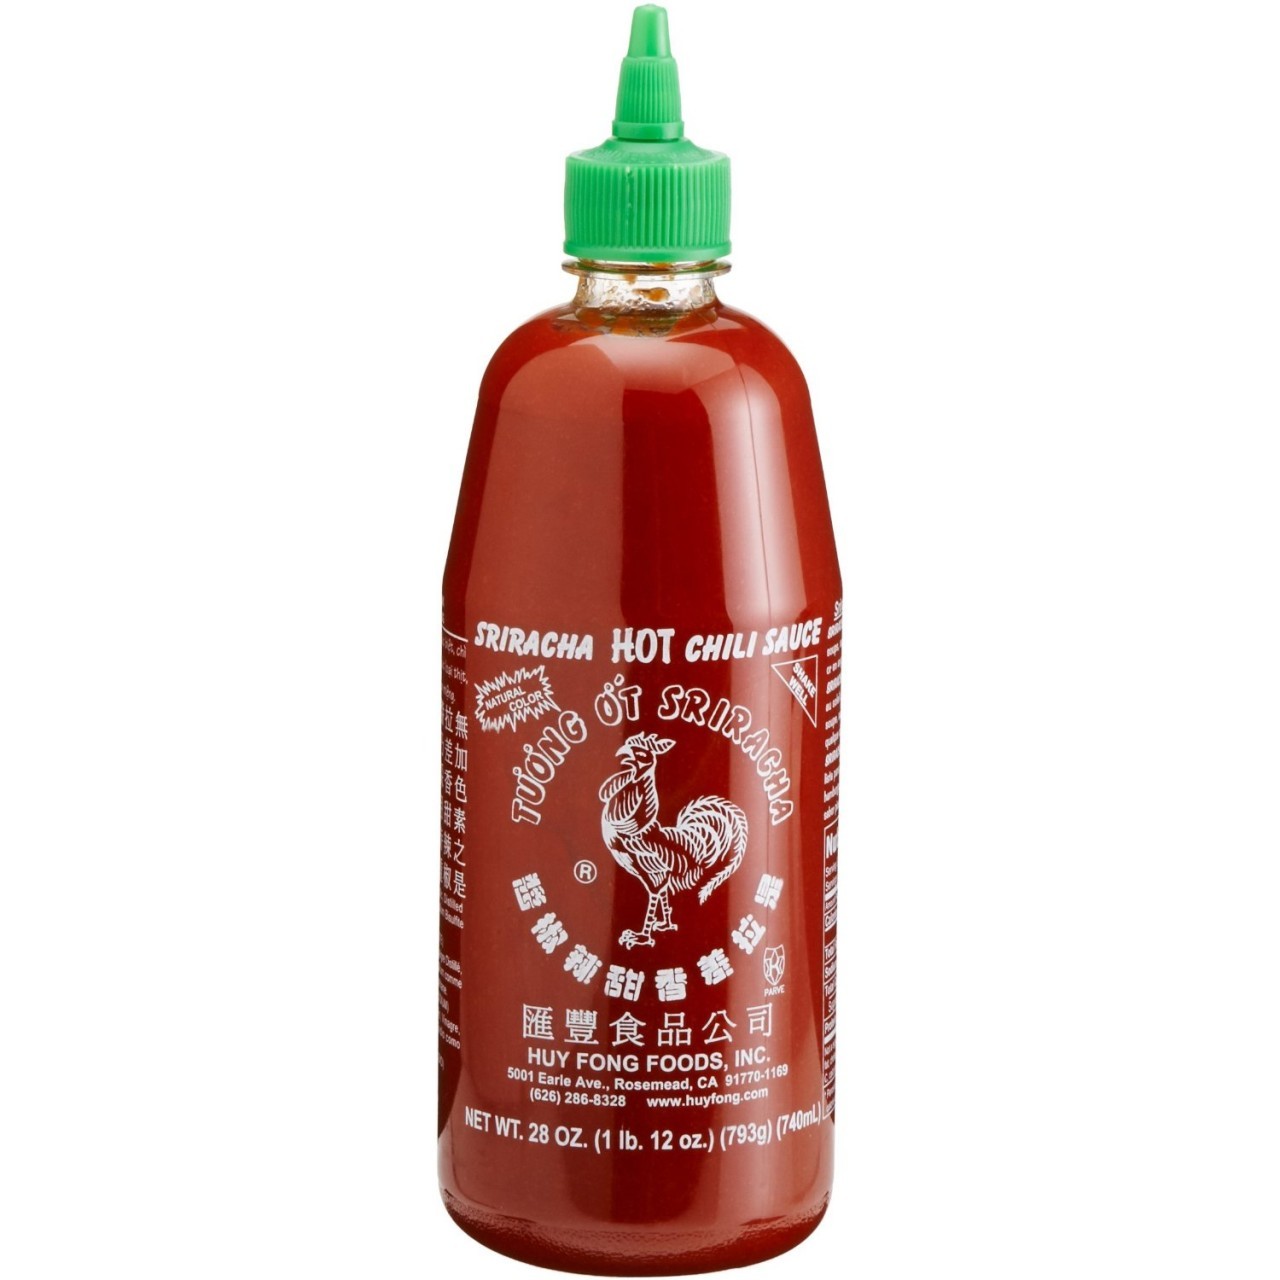 Oh Holy Sriracha Save Me From My Own Cooking May Make This Sad